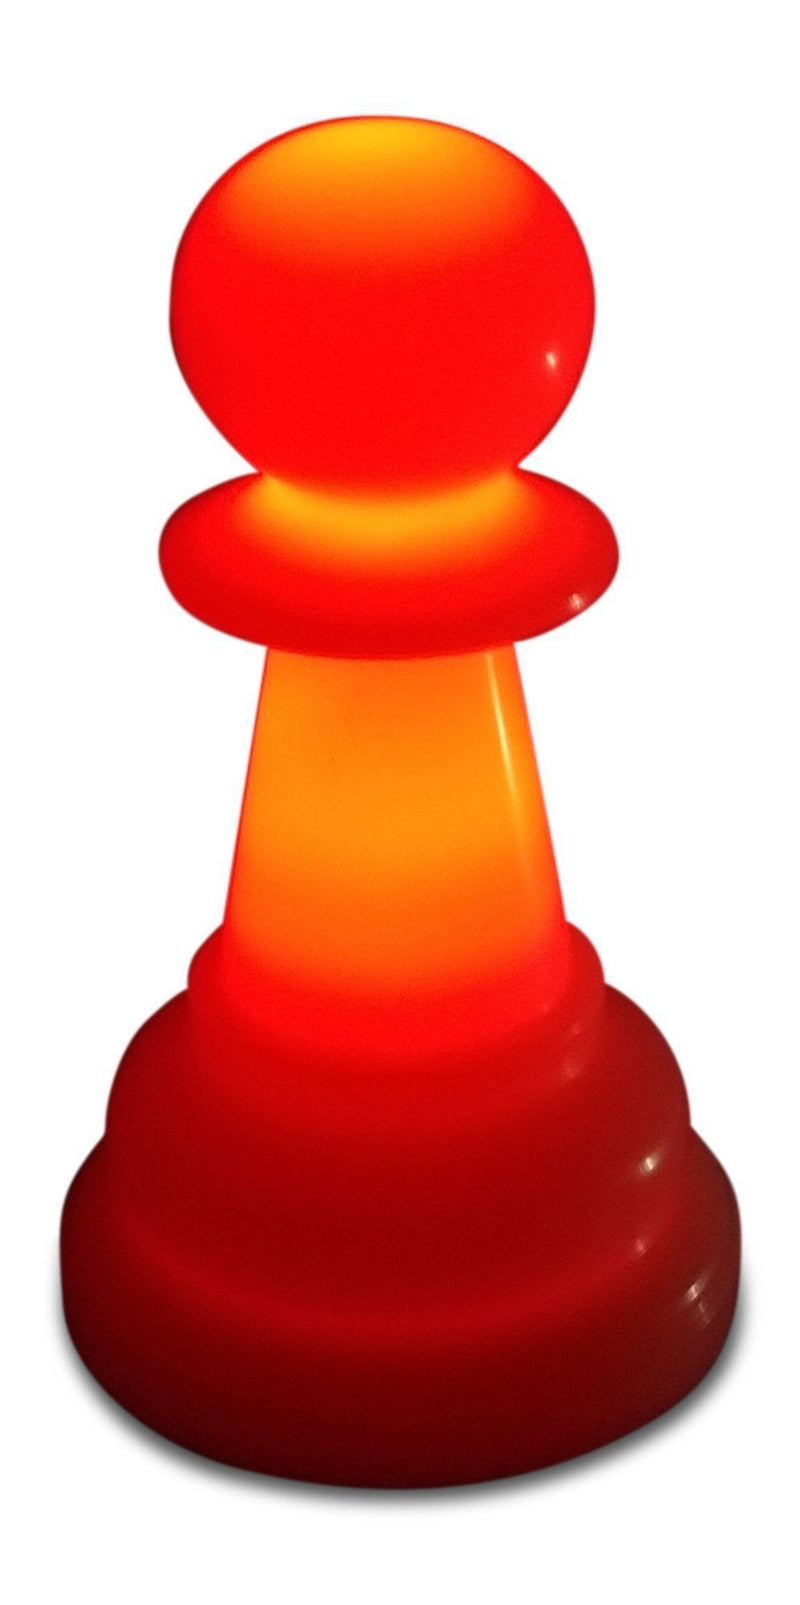 MegaChess 12 Inch Premium Plastic Pawn Light-Up Giant Chess Piece - Red |  | GiantChessUSA